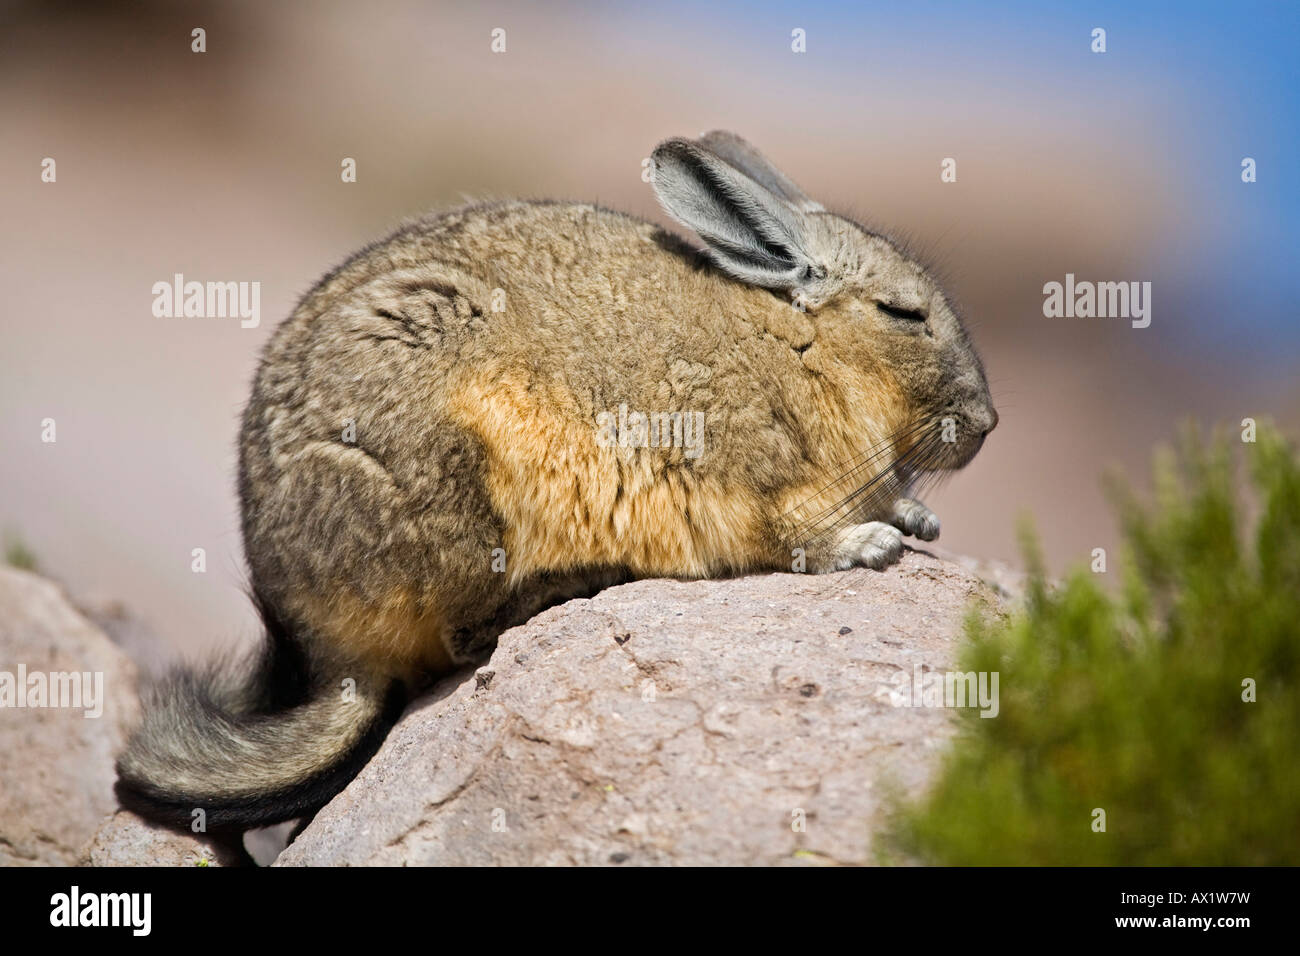 Viscacha (Lagidium) relatives from the Chinchillas at the rocks, Conaf station Las Cuevas, national park Lauca, Chile, South Am Stock Photo